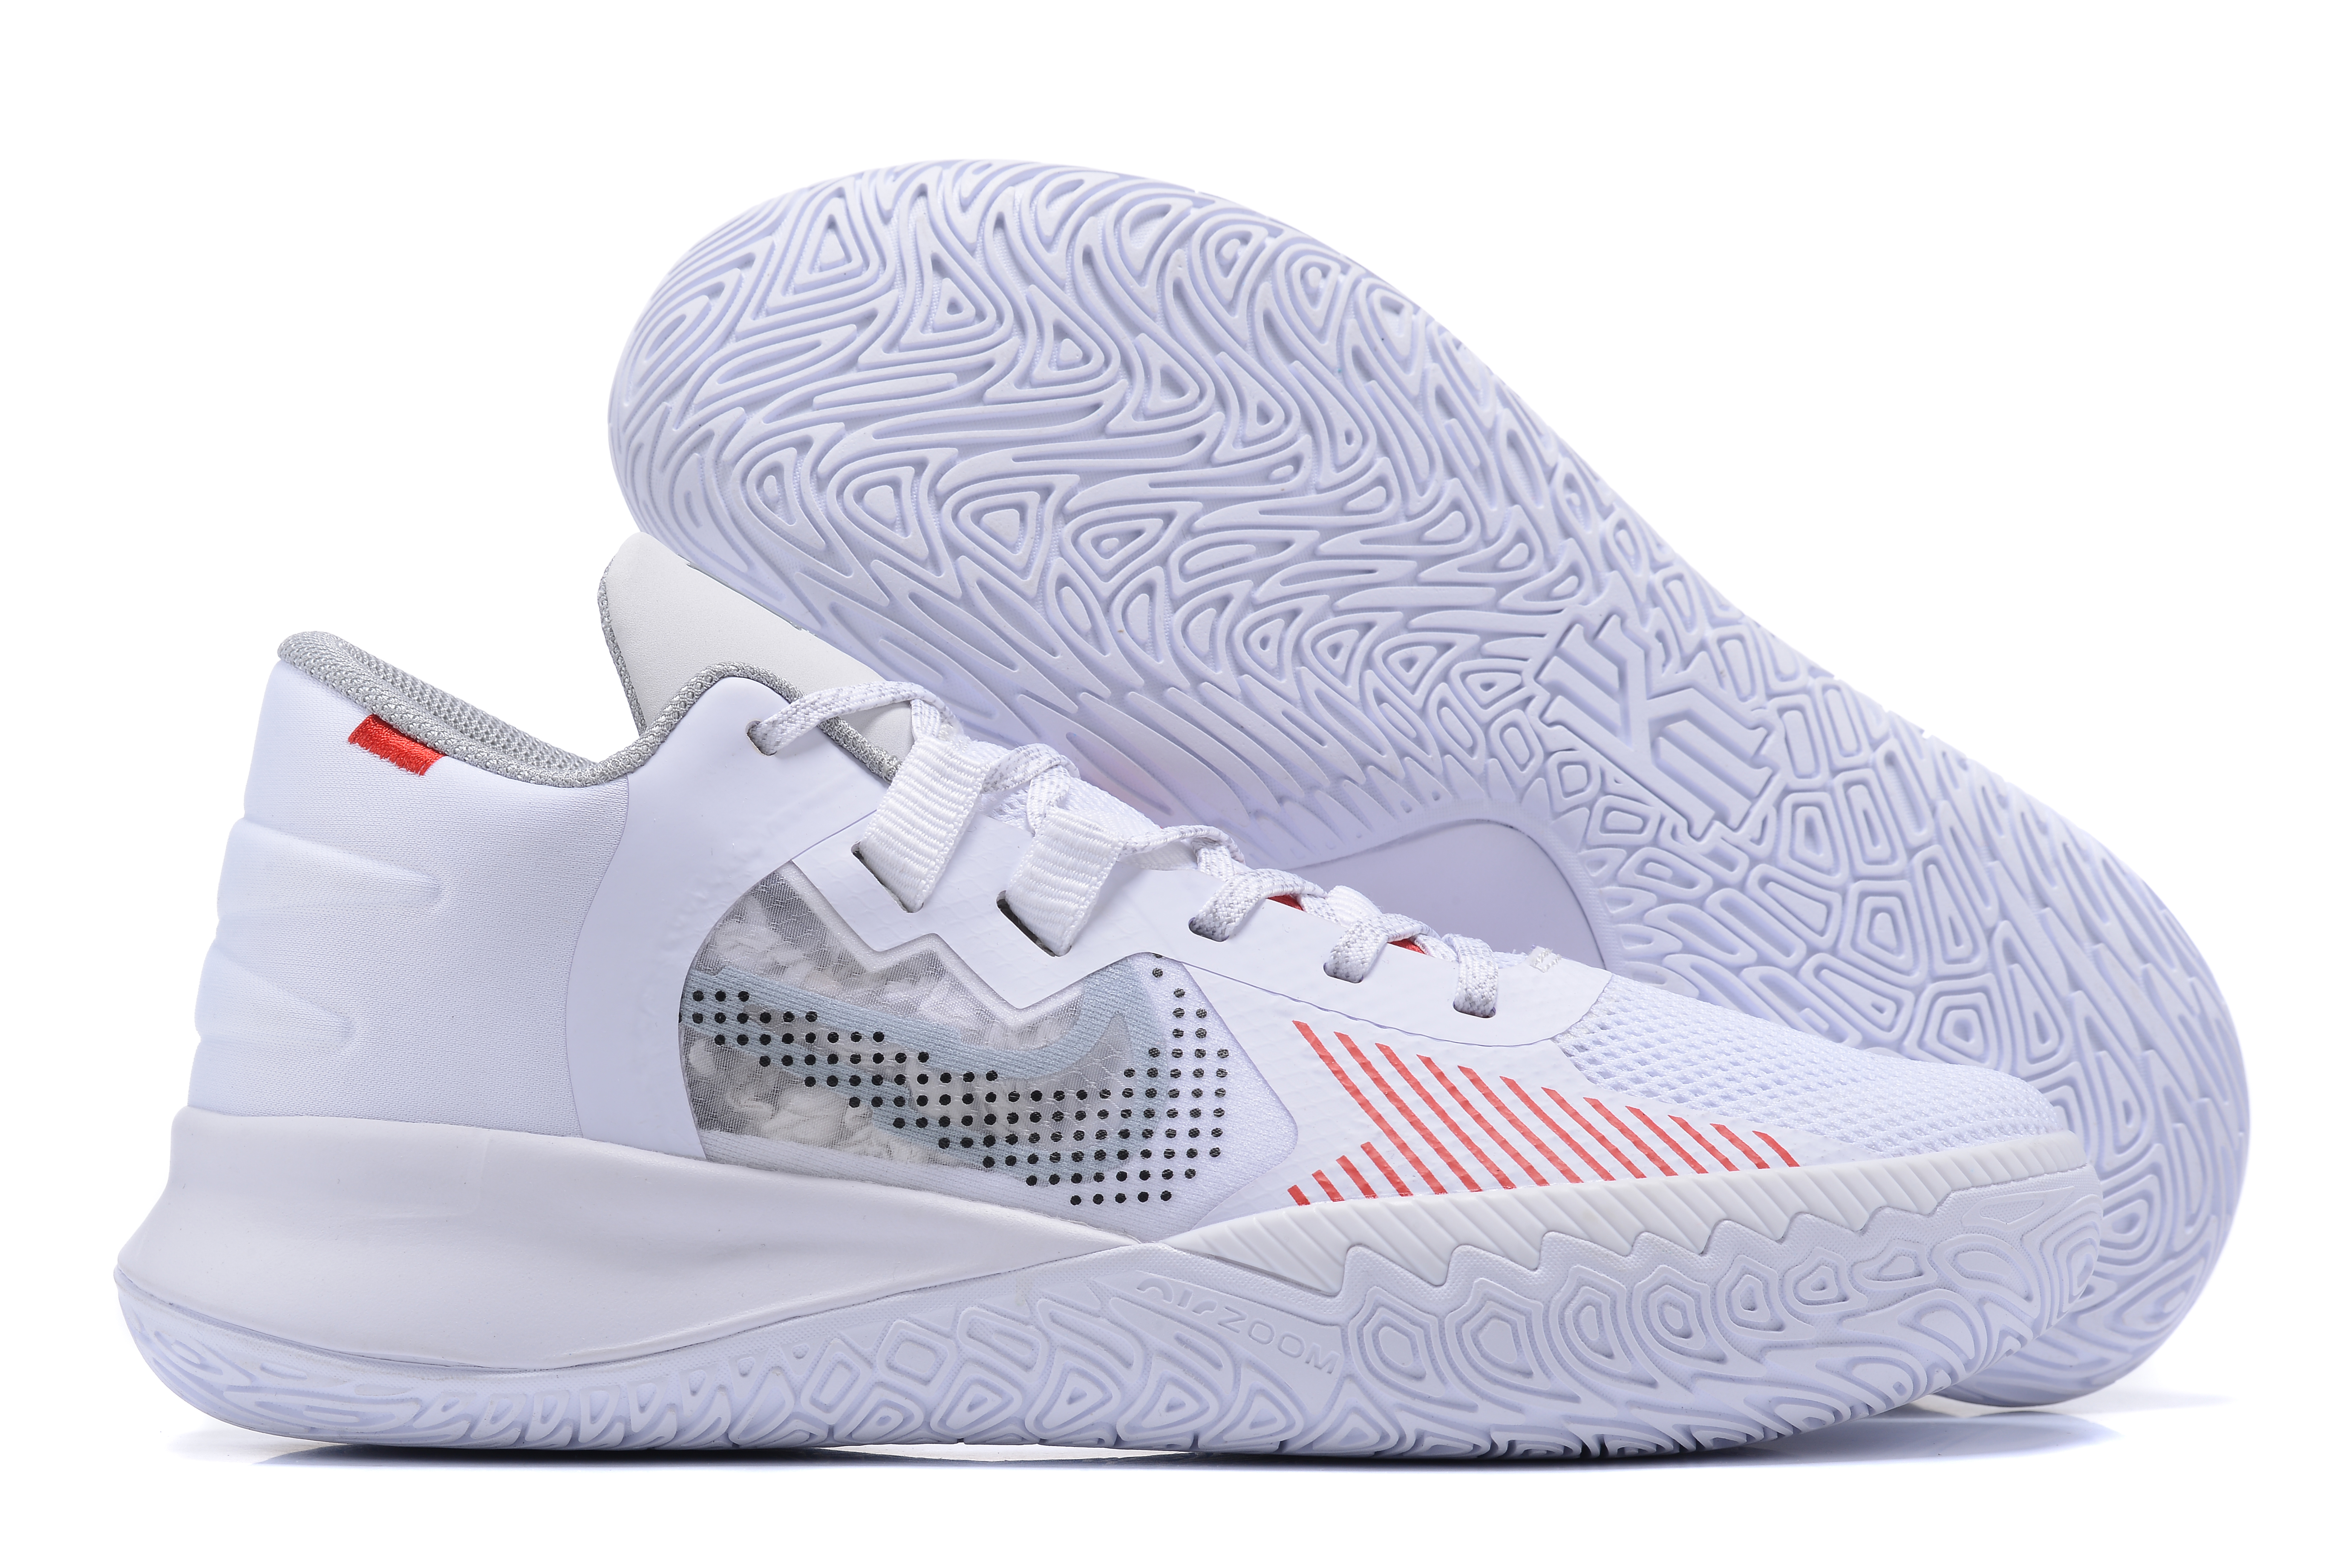 Nike Kyrie Flytrap 5 EP White Grey Red Shoes